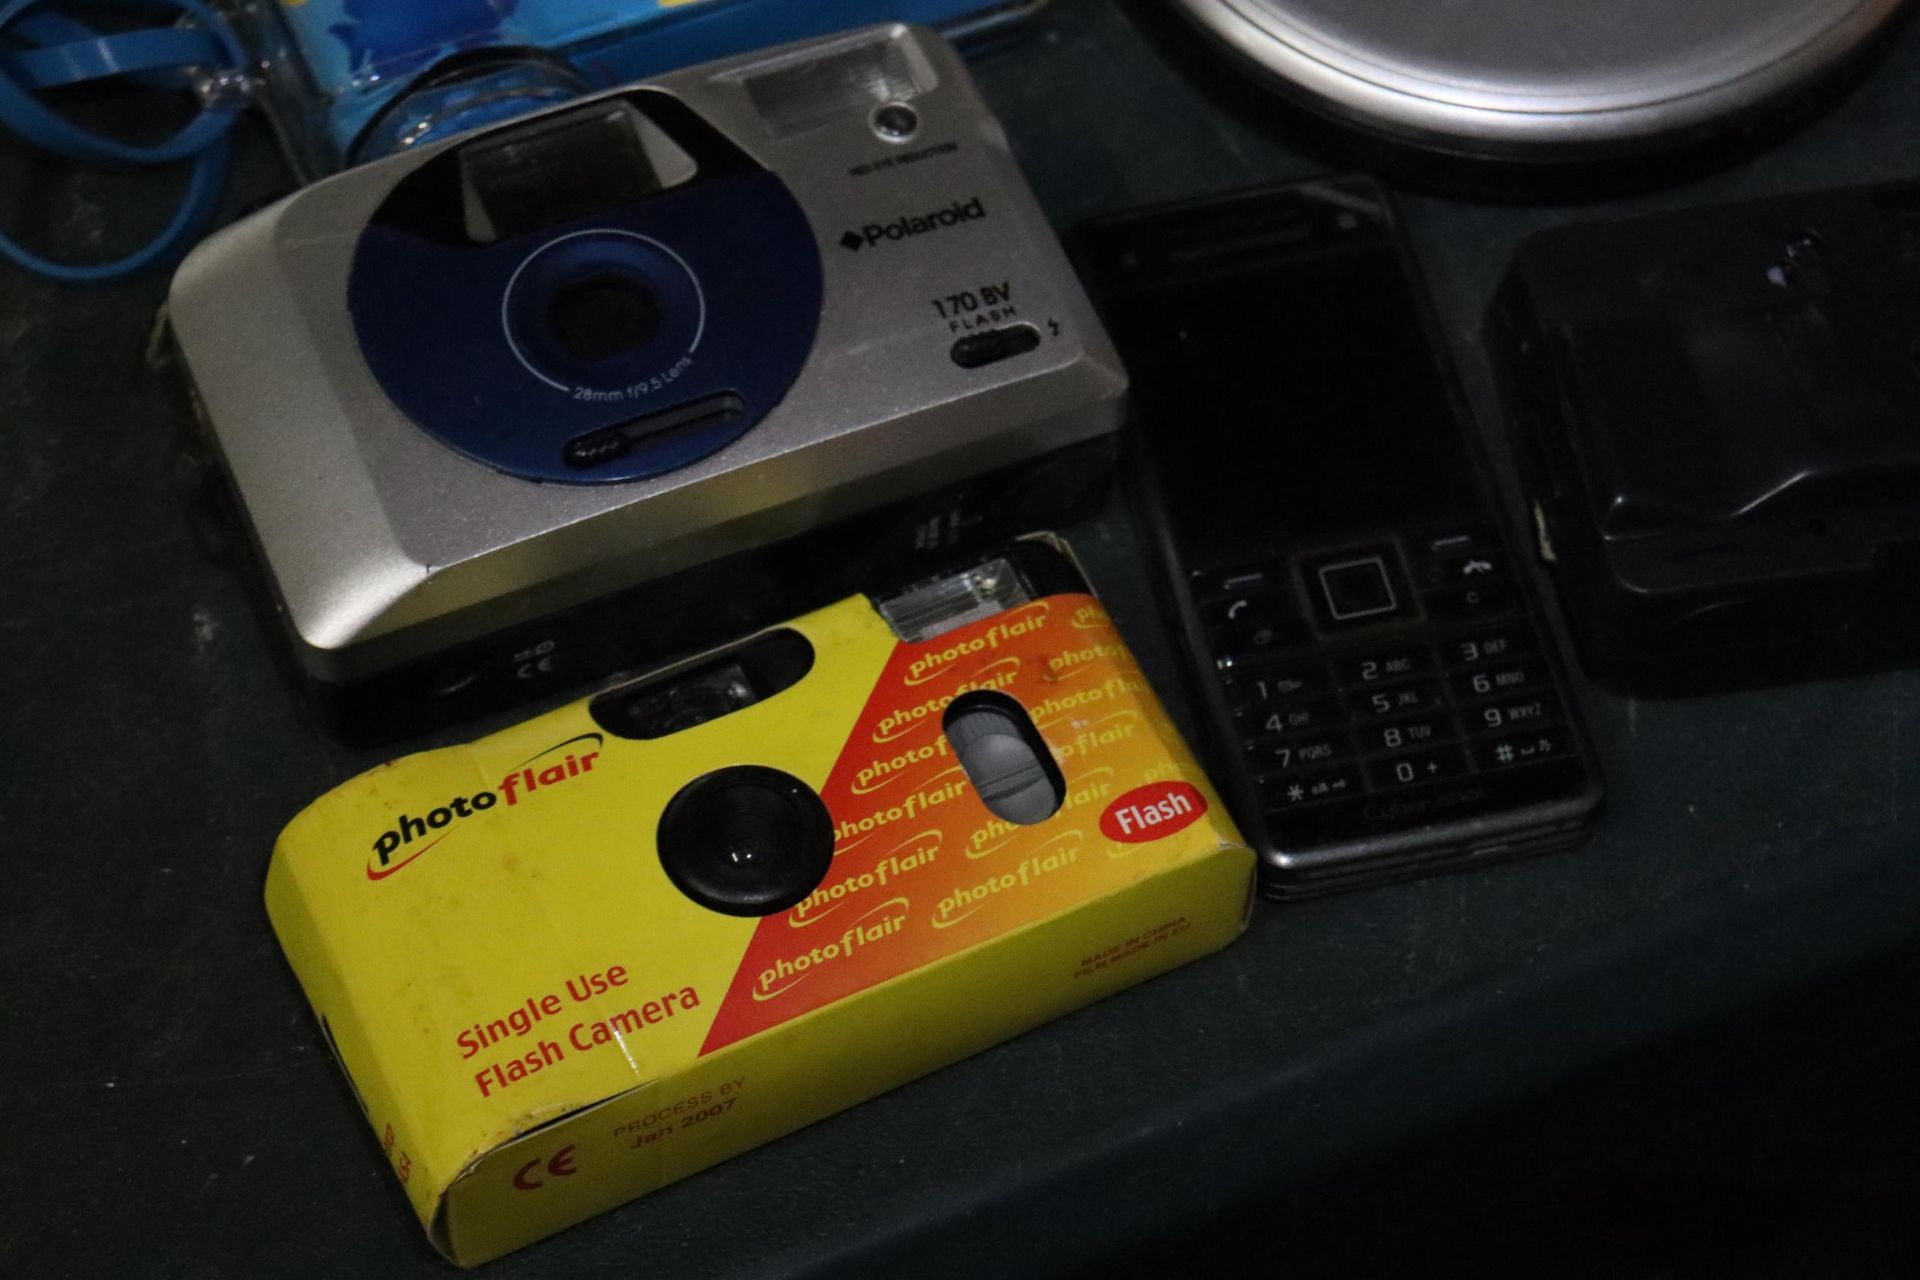 A COLLECTION OF FIVE CAMERAS, A PORTABLE CD PLAYER, 'TALKGIRL' CASSETTE PLAYER AND A SMARTIES - Image 8 of 8